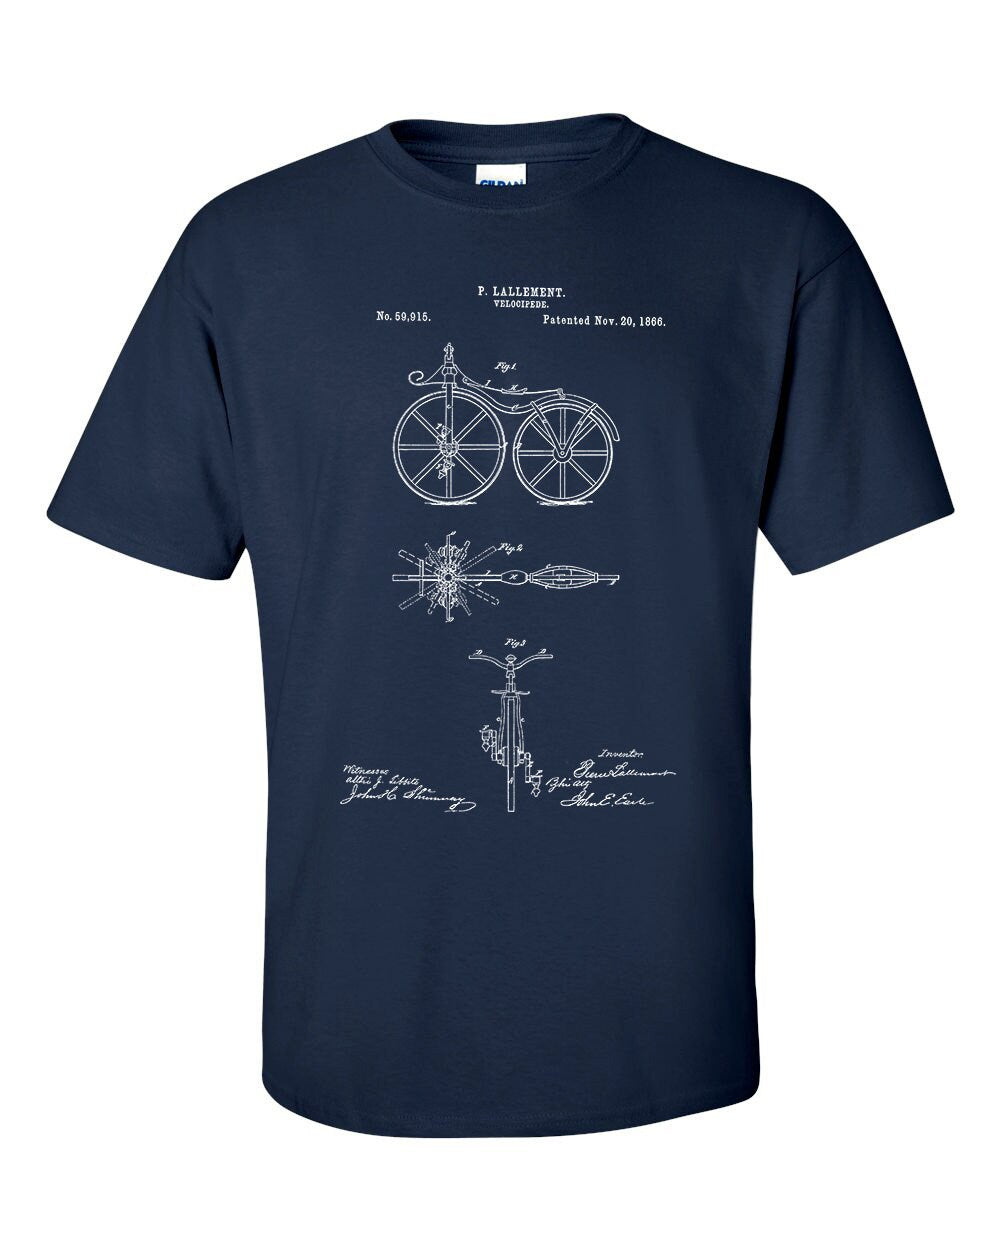 First Bicycle Patent 1866 Velocipede Bike Blueprint T-Shirt